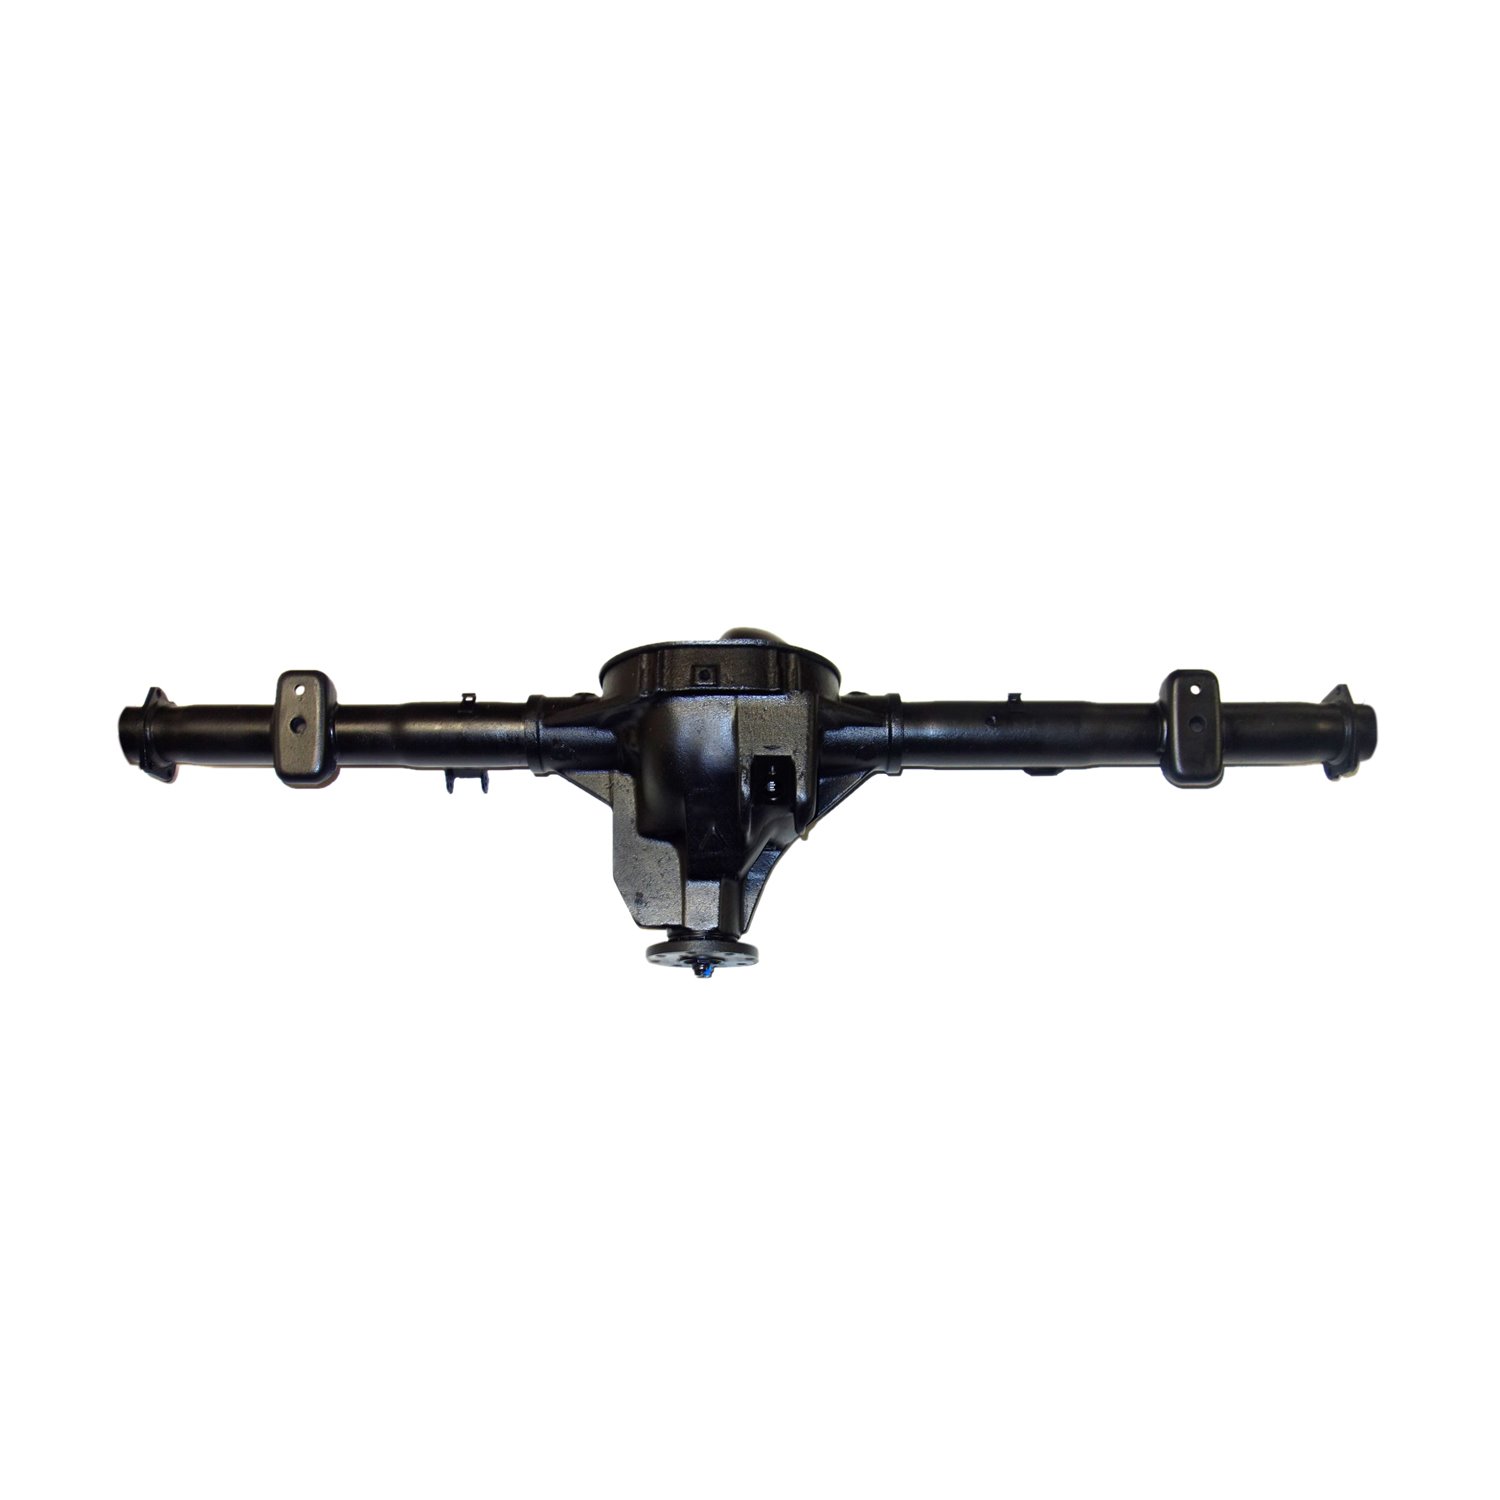 Remanufactured Complete Axle Assembly for Ford 8.8" 94-97 Ford Ranger 3.73 , 10" Brakes